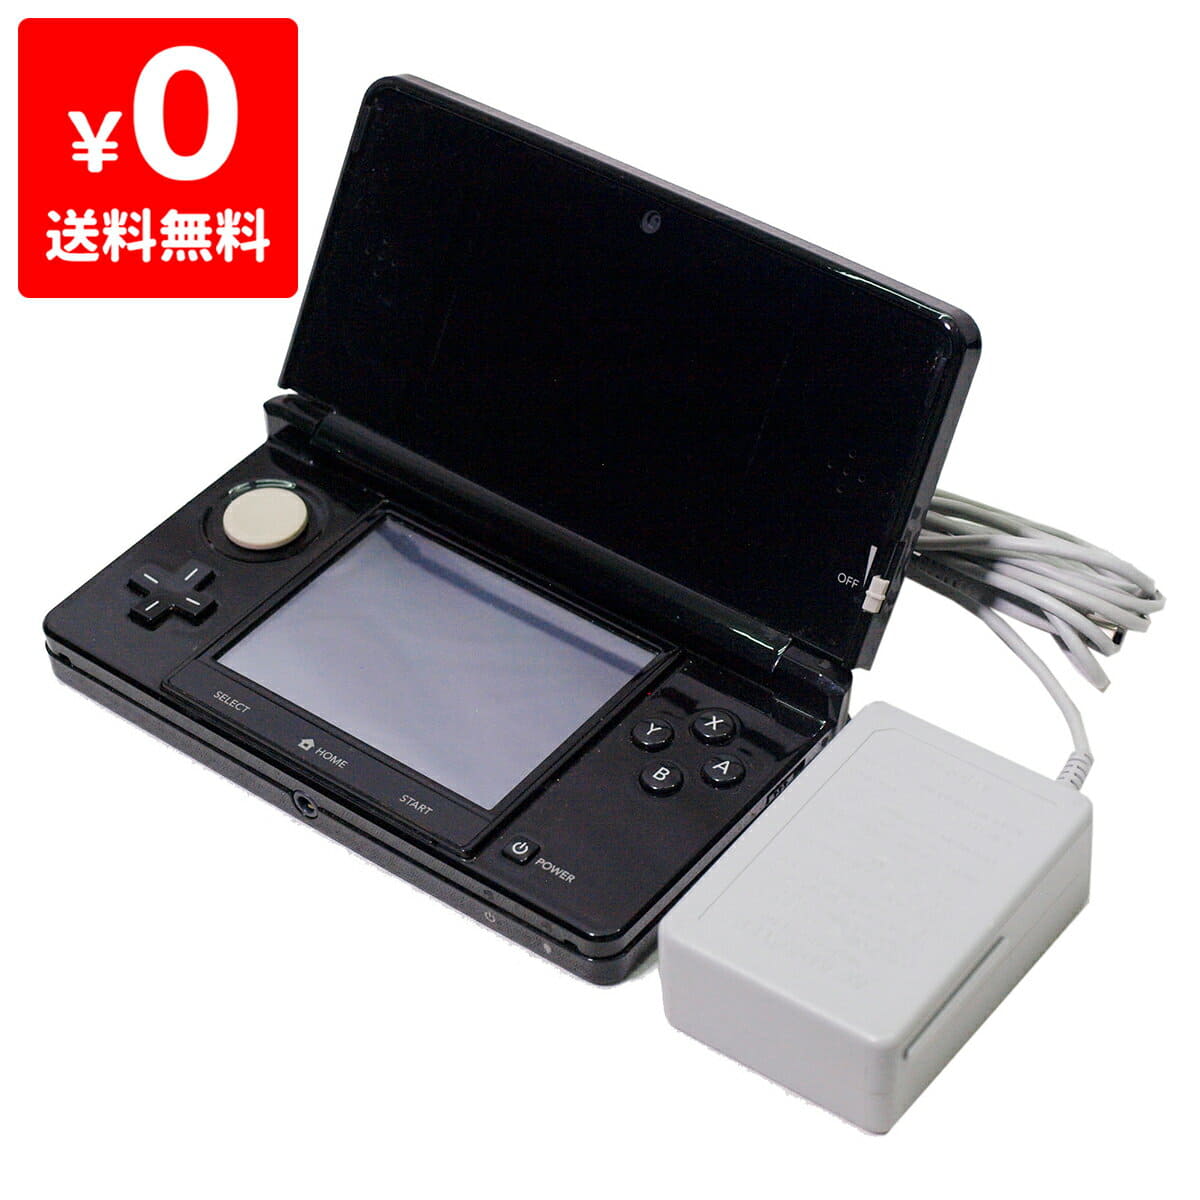 Used]4902370518757 3DS Nintendo 3DS Cosmo Black (CTRSKAAA) set Nintendo  Nintendo Nintendo used which can be idle immediately - BE FORWARD Store